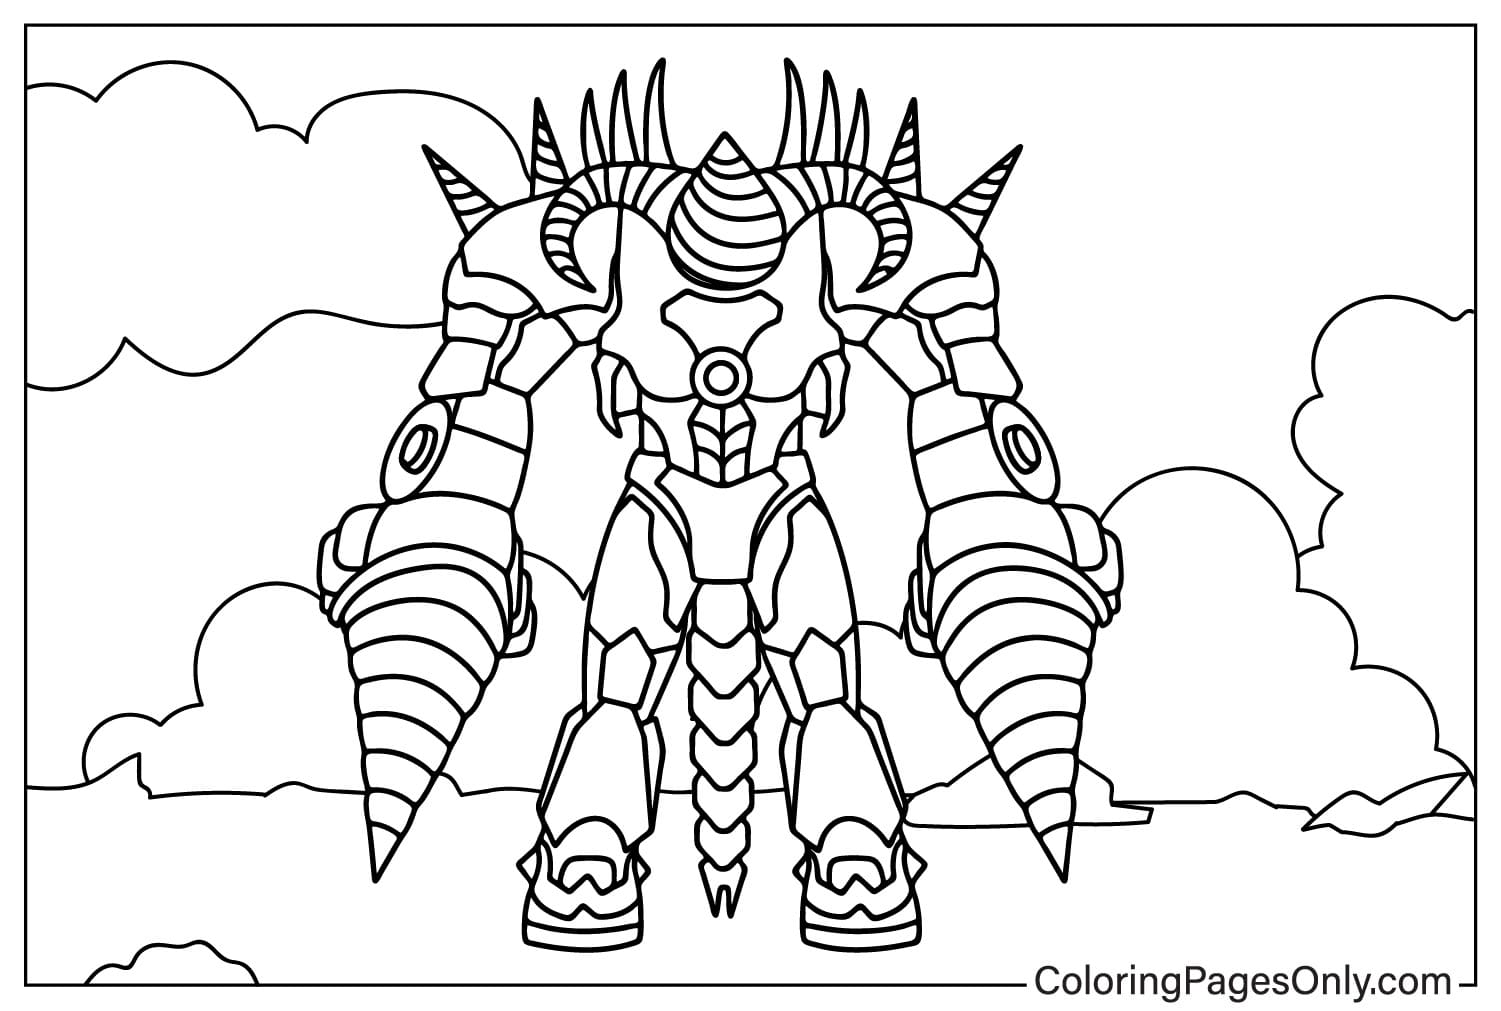 Upgraded Titan Drill Man Free Coloring Page - Free Printable Coloring Pages